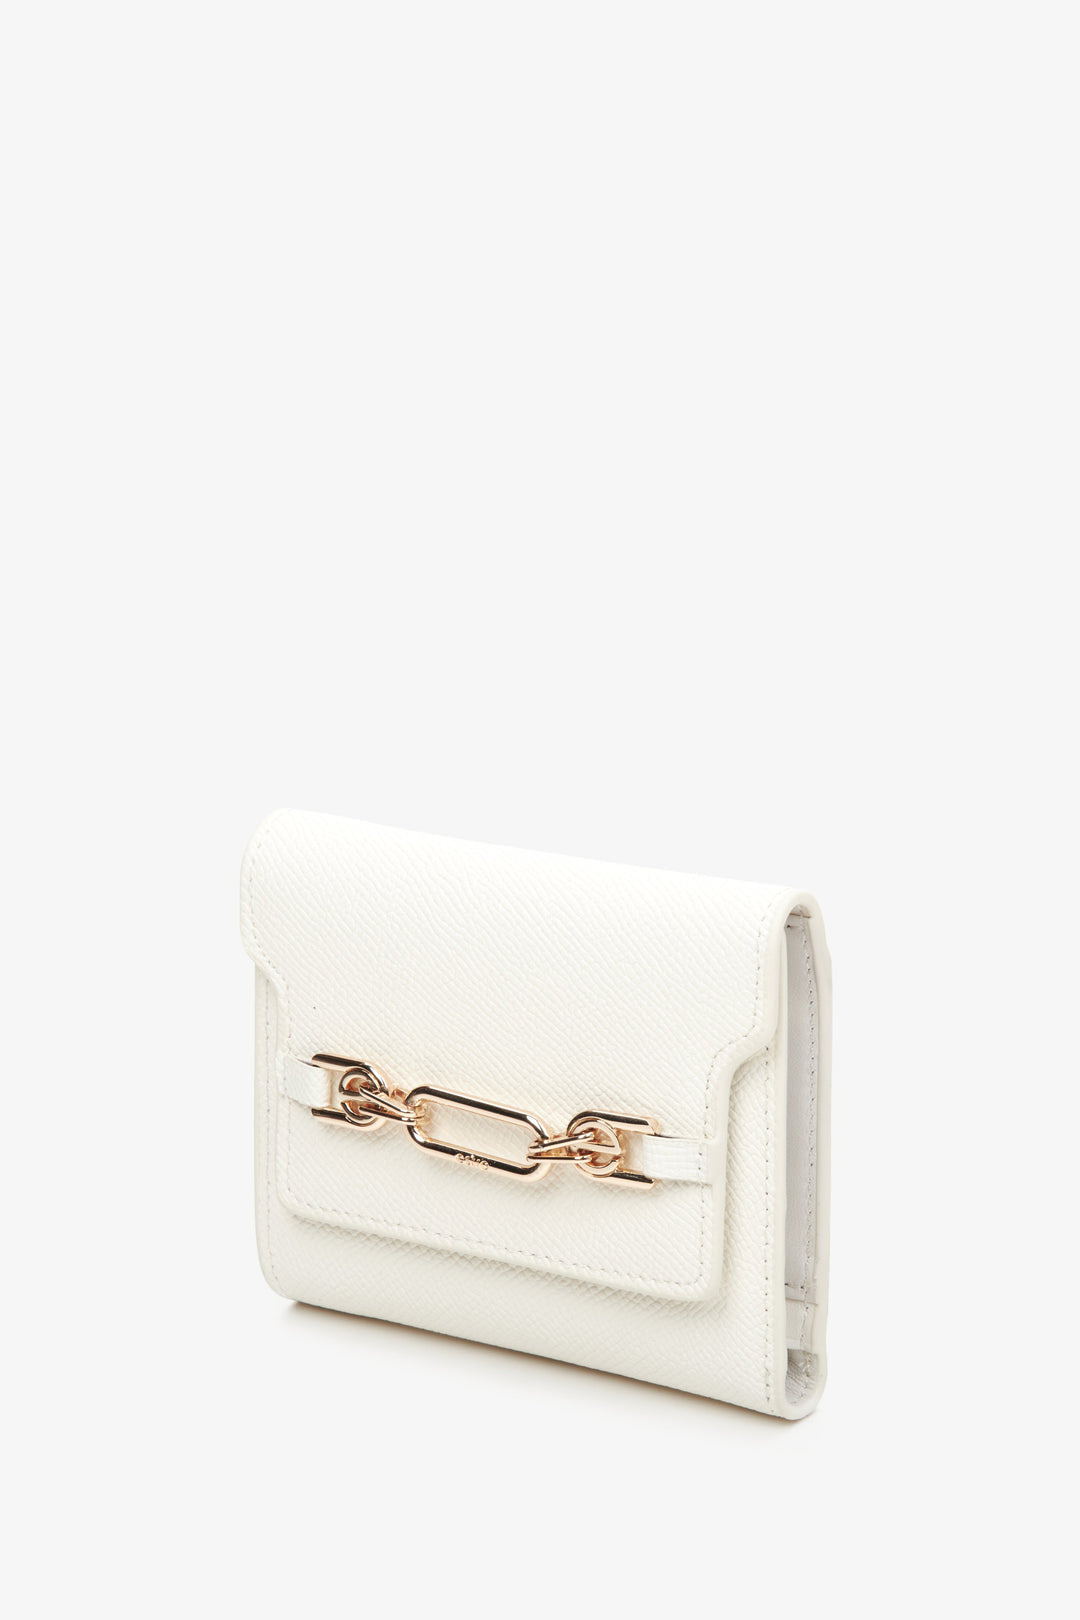 Women's light beige leather wallet with a gold clasp, Estro.